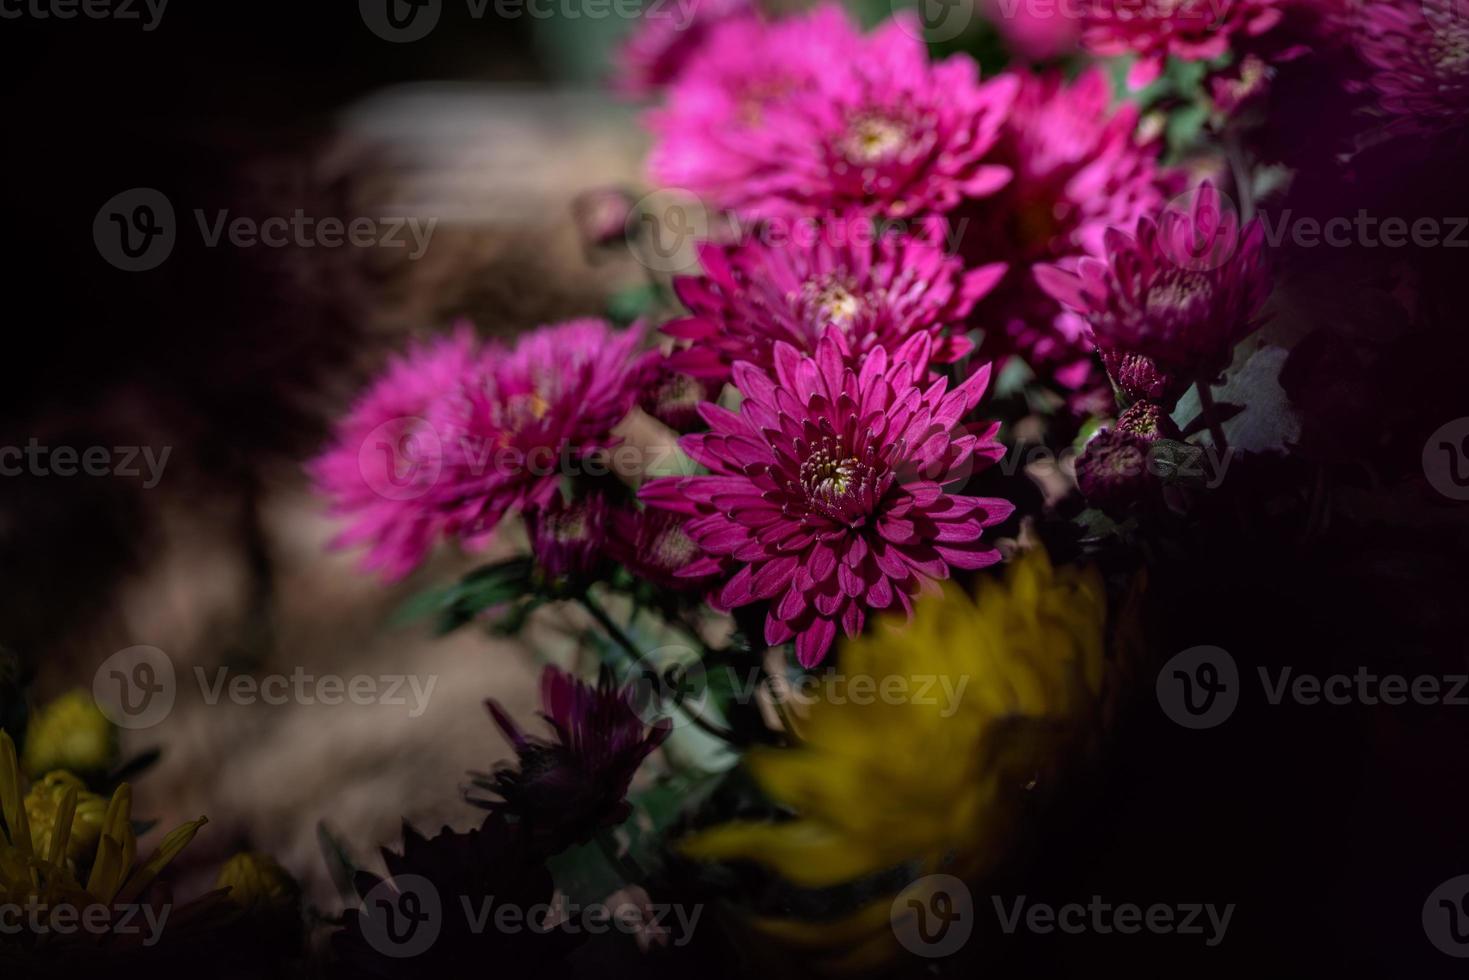 The smaller purple chrysanthemums in the park are against a dark green background photo